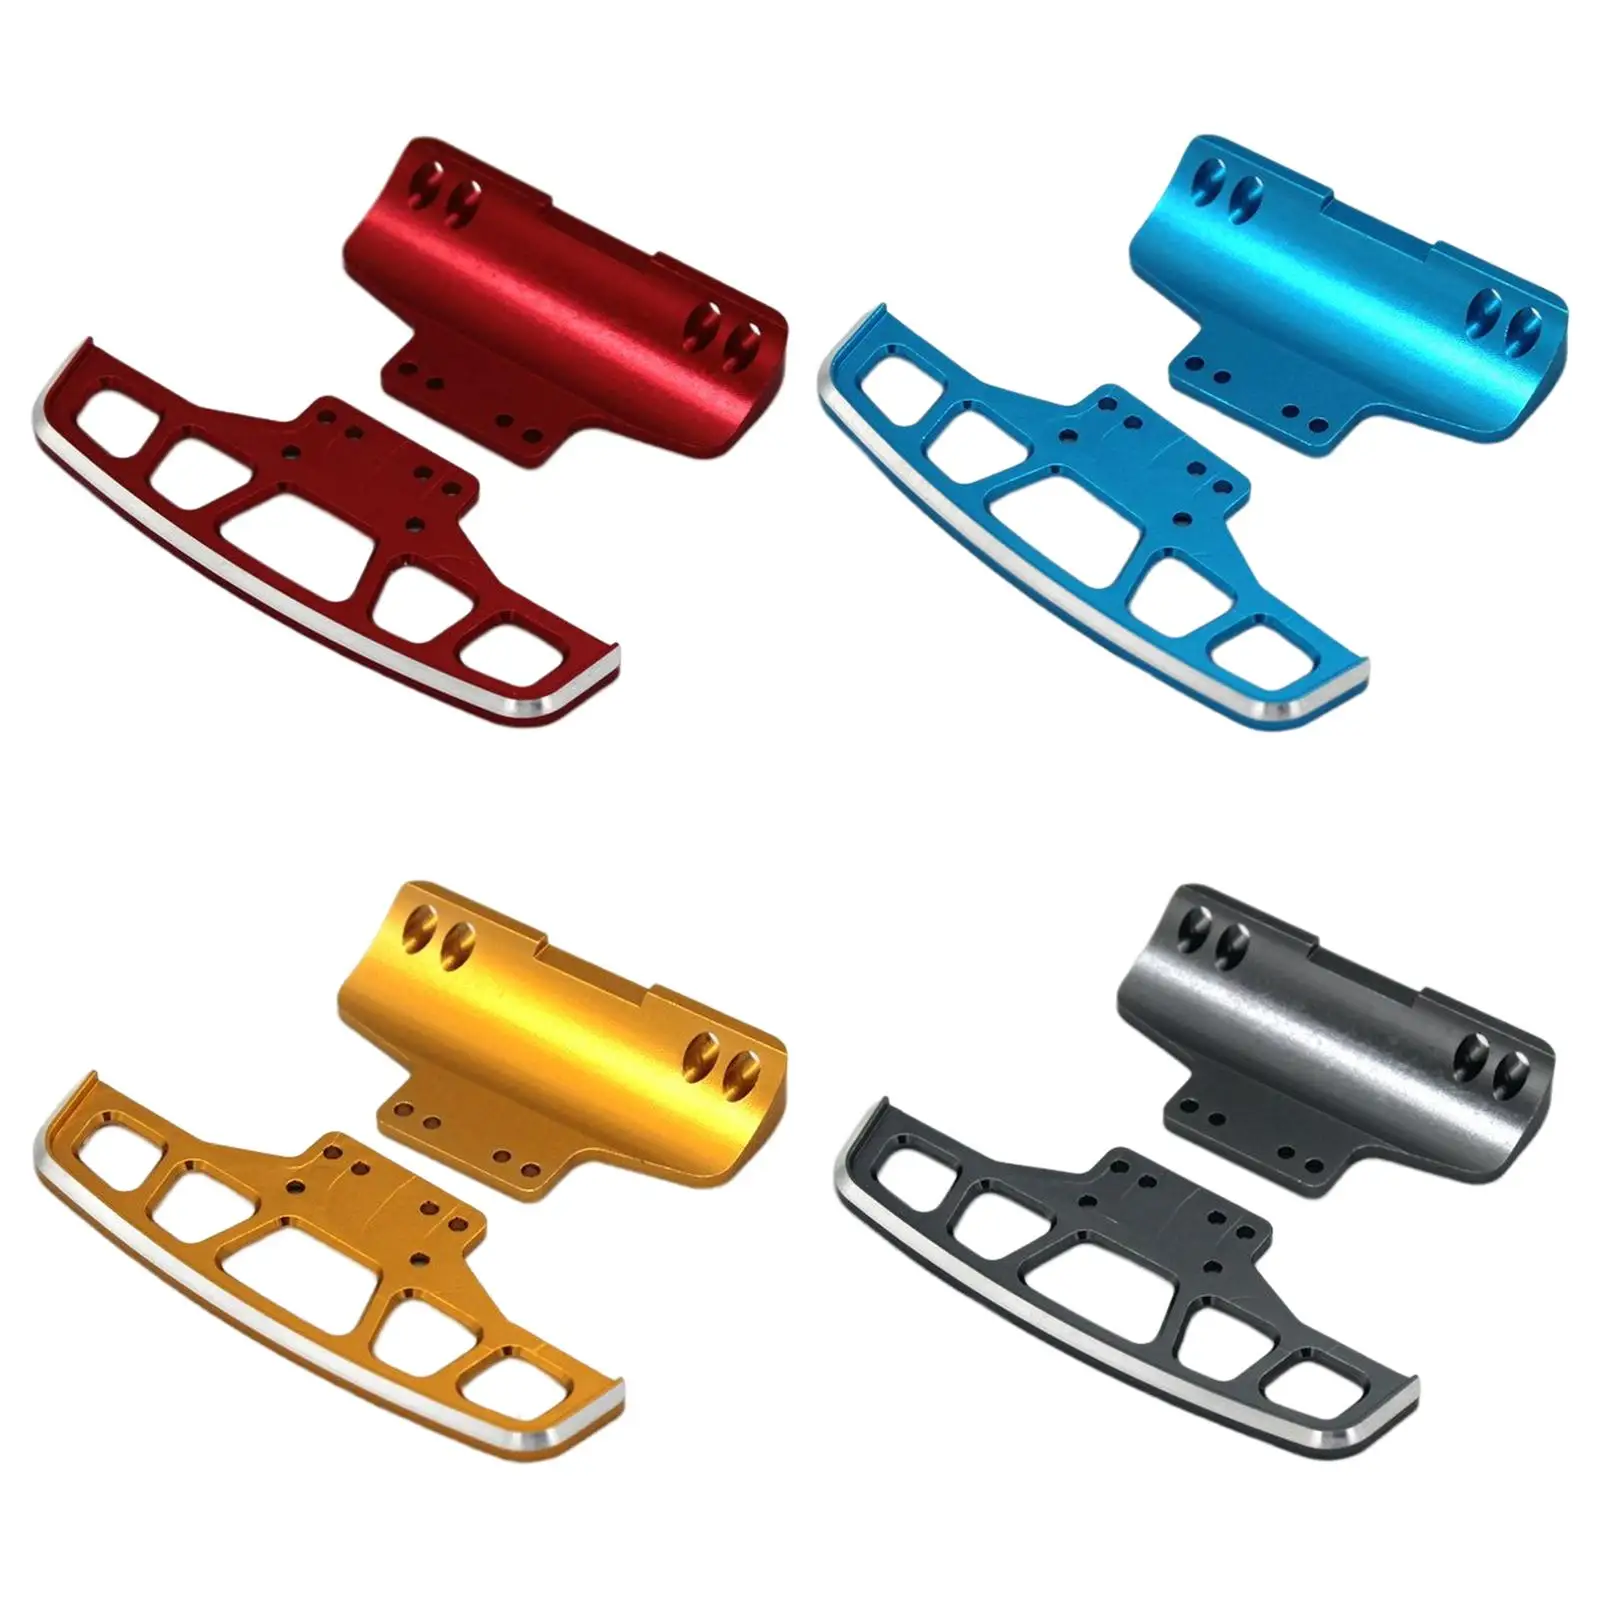 Aluminum Alloy Front and Rear Bumpers Spare Parts for Wltoys 284131 DIY